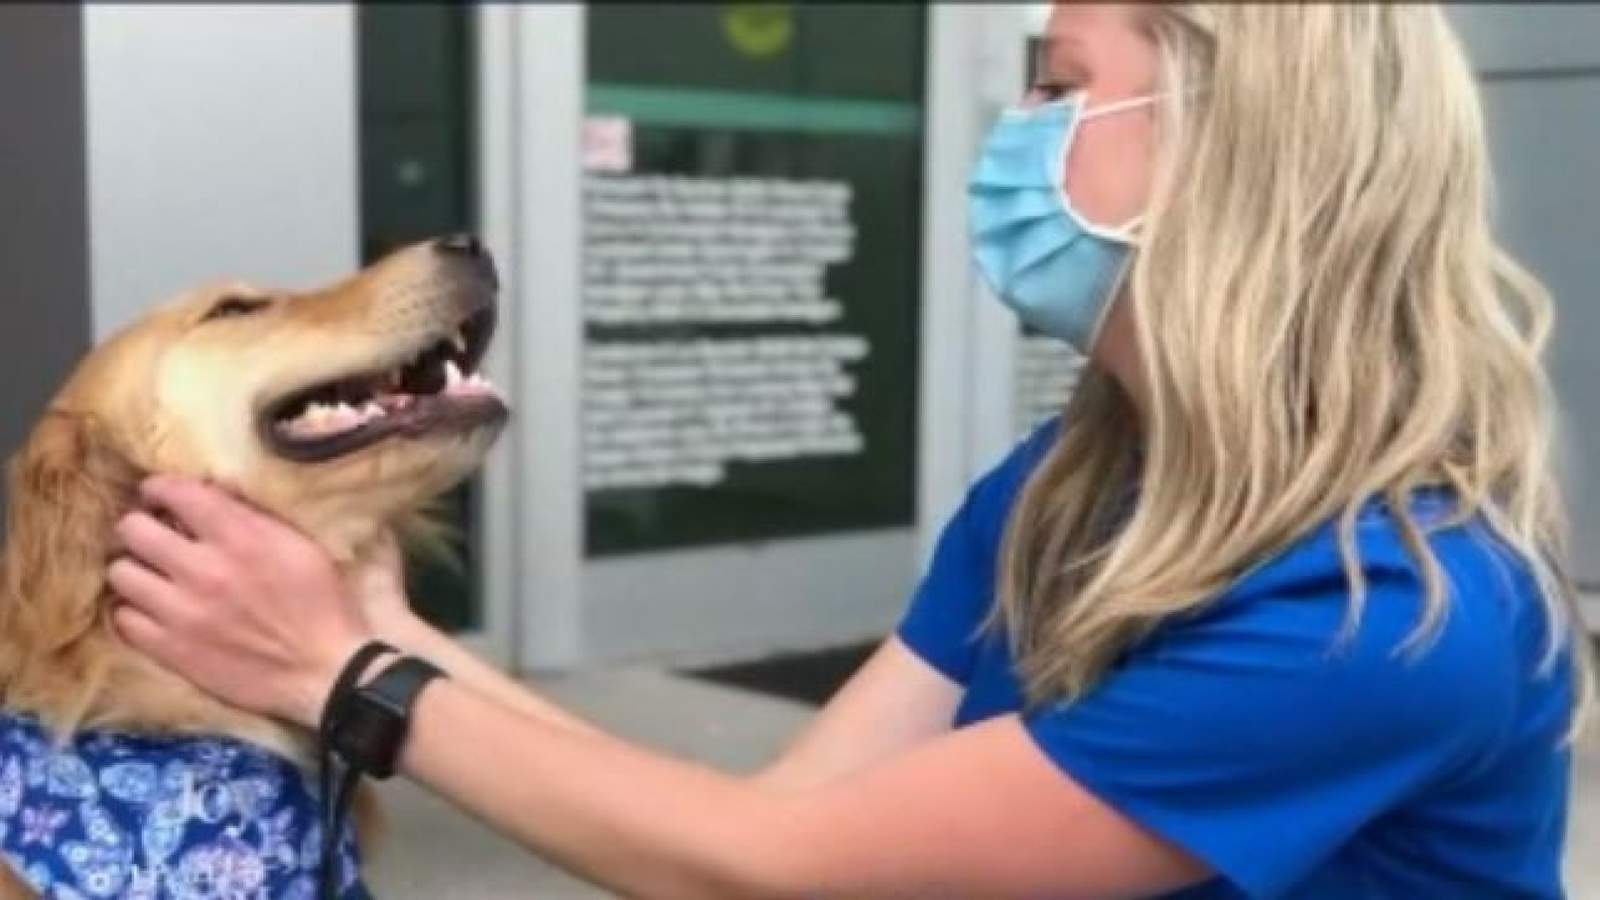 Comfort dog brings smiles, comfort to local hospital staff battling against COVID-19